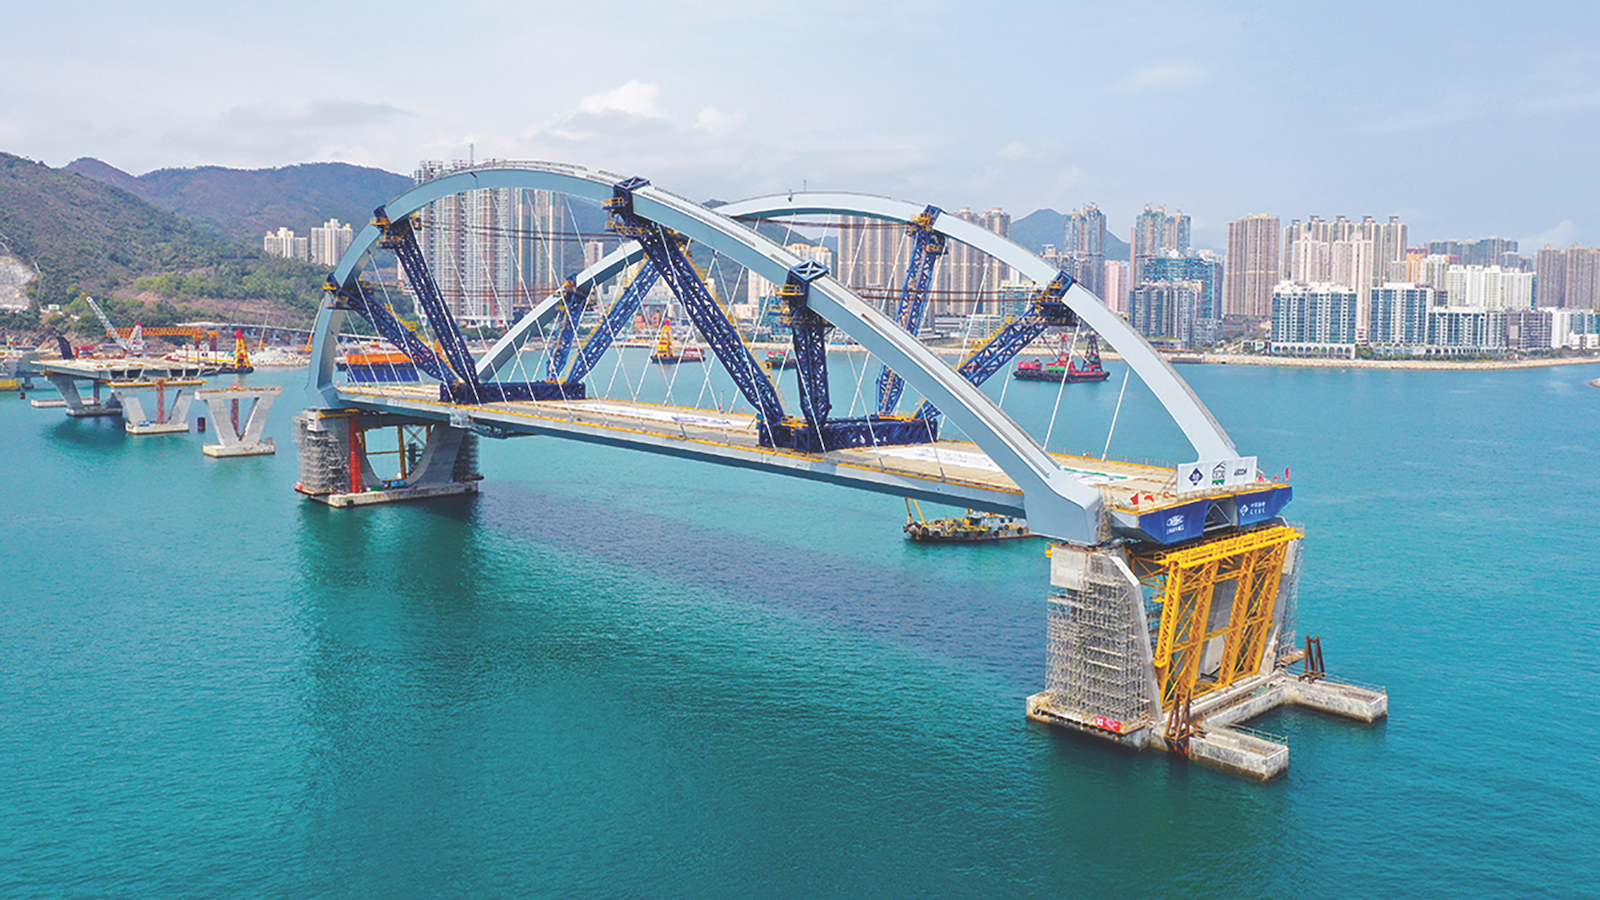 The 200m Eternity Arch is a component of the 1.8km Cross Bay Link in Hong Kong